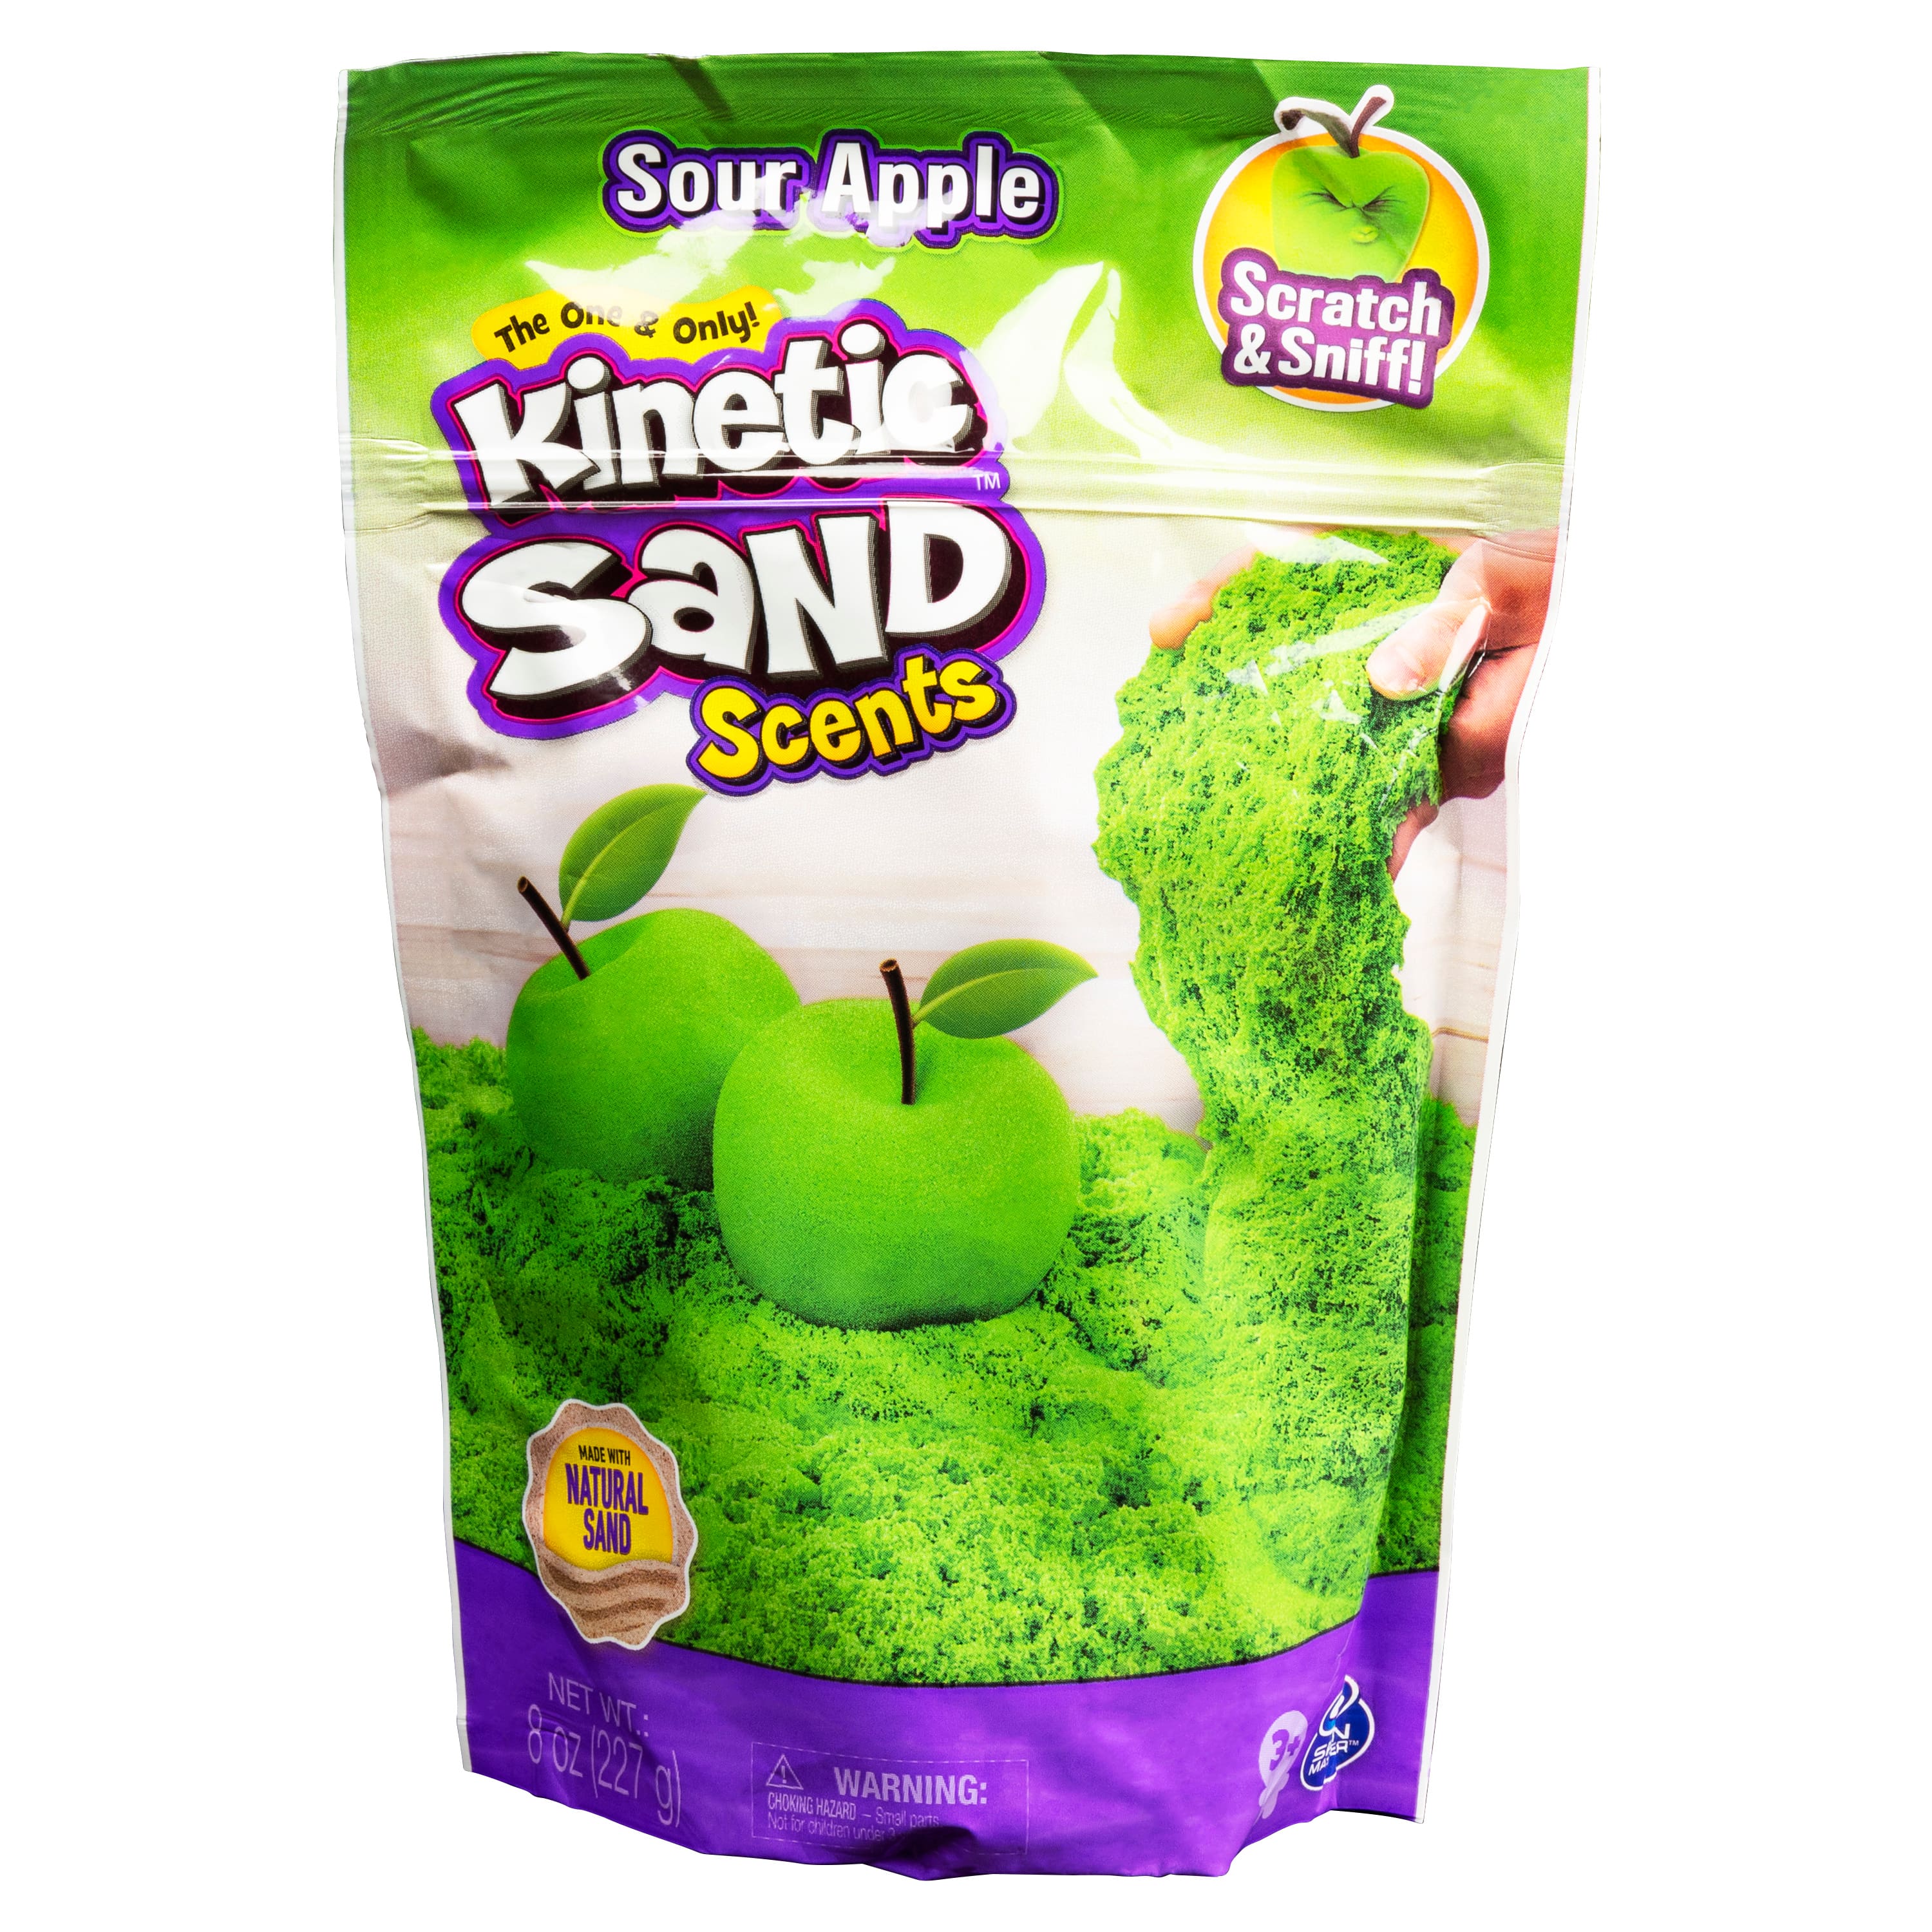 Kinetic Sand, Sweet Scents 4-Pack with 2lb of Sour Gummy, Lollipop